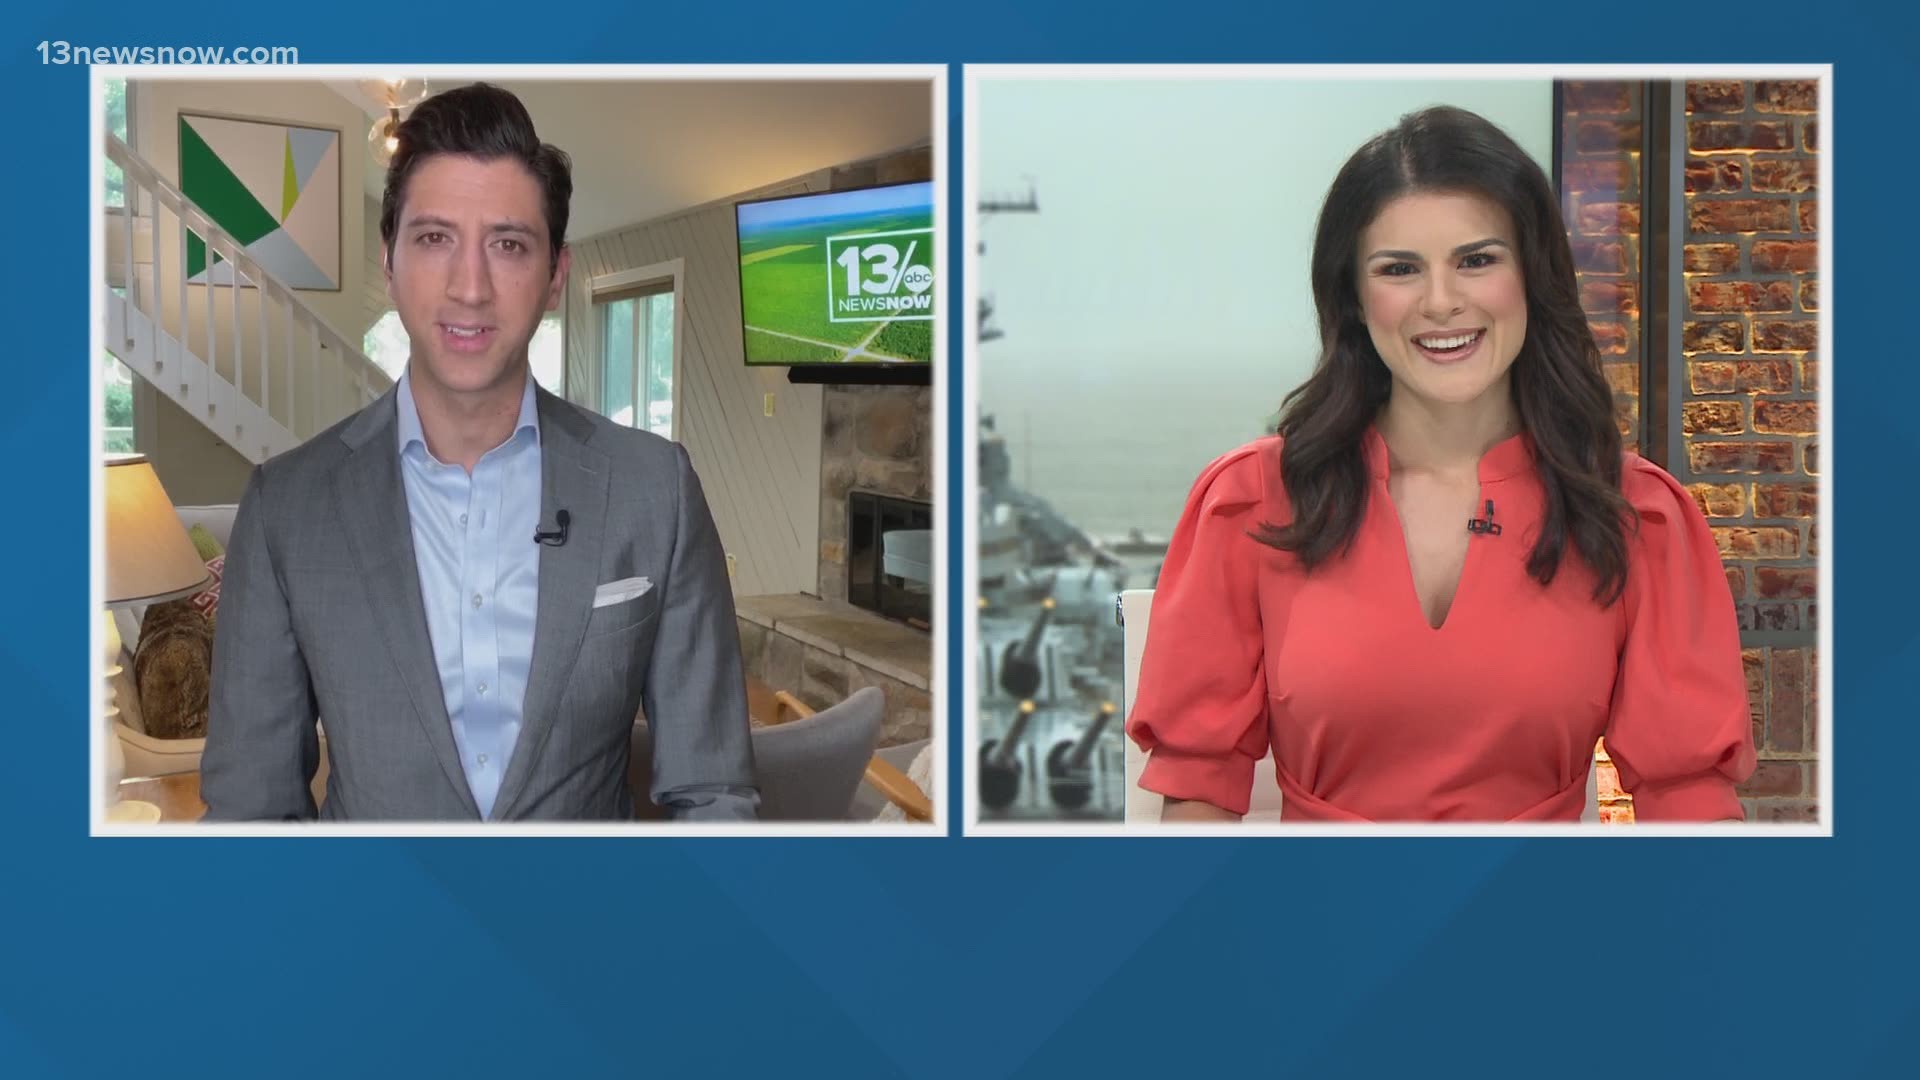 Top stories: 13News Now at 4 p.m. with Philip Townsend and Adriana De Alba, August 14, 2020.